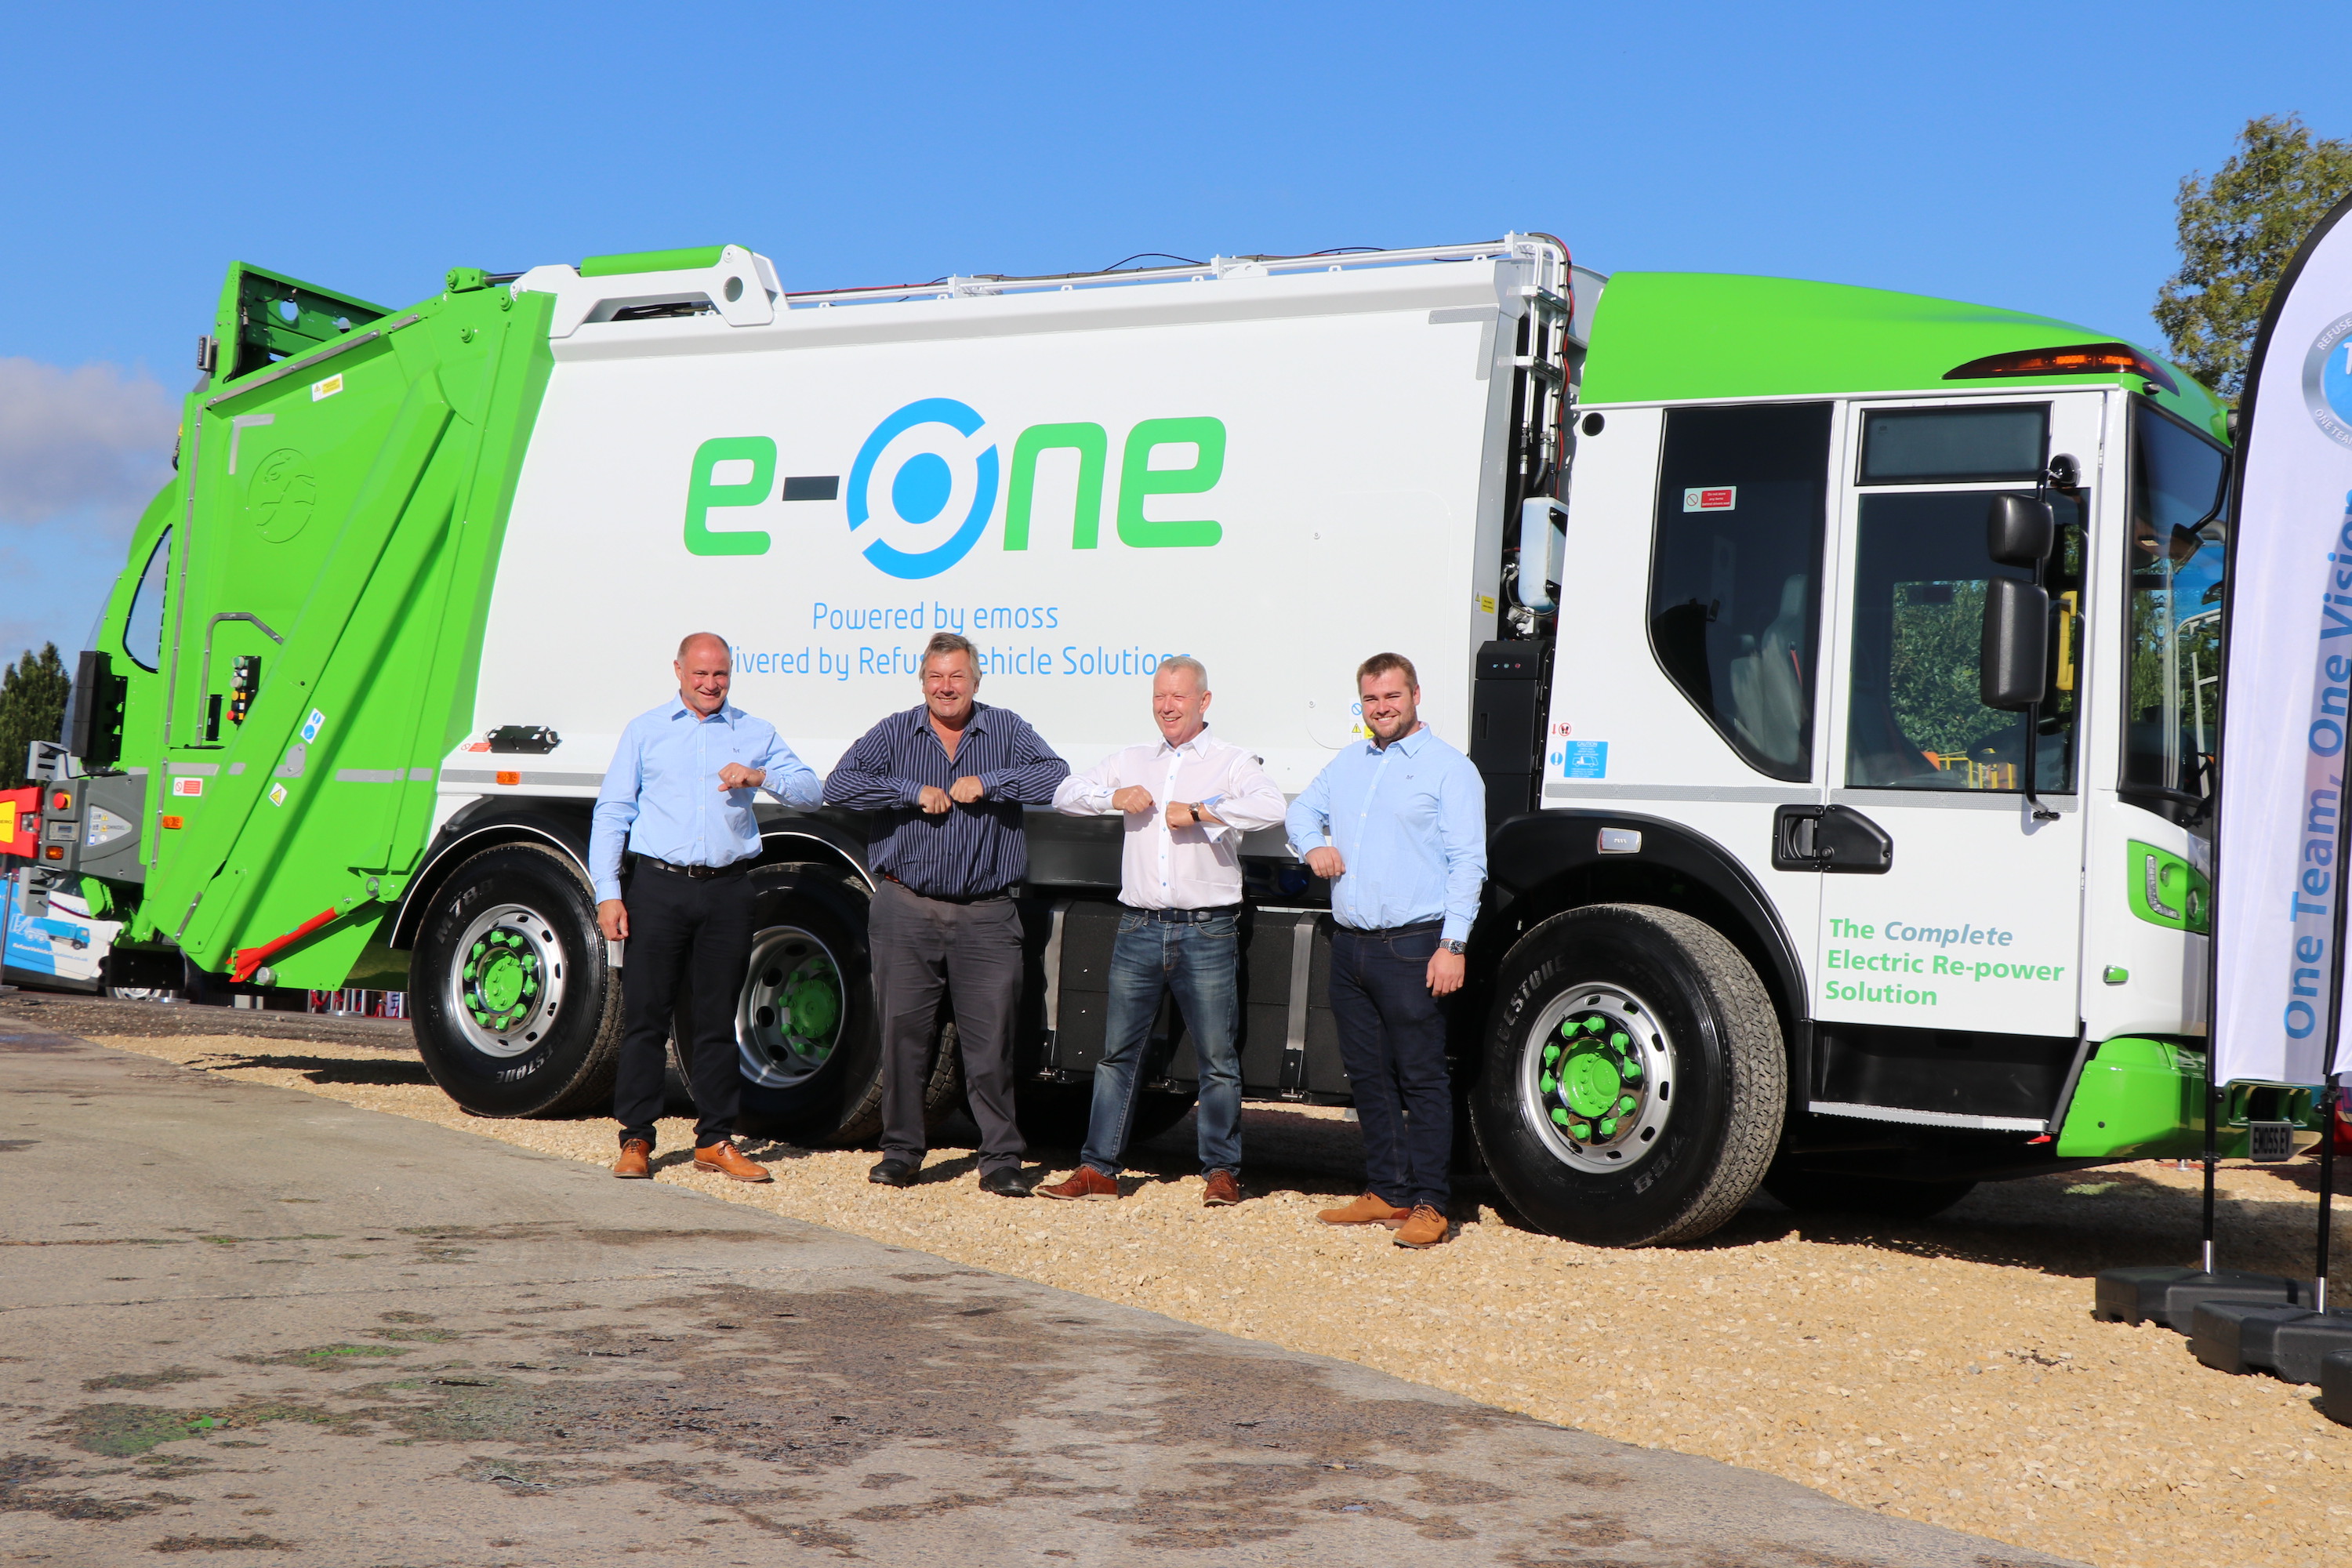 The first eOne electric refuse truck from RVS and EMOSS has been